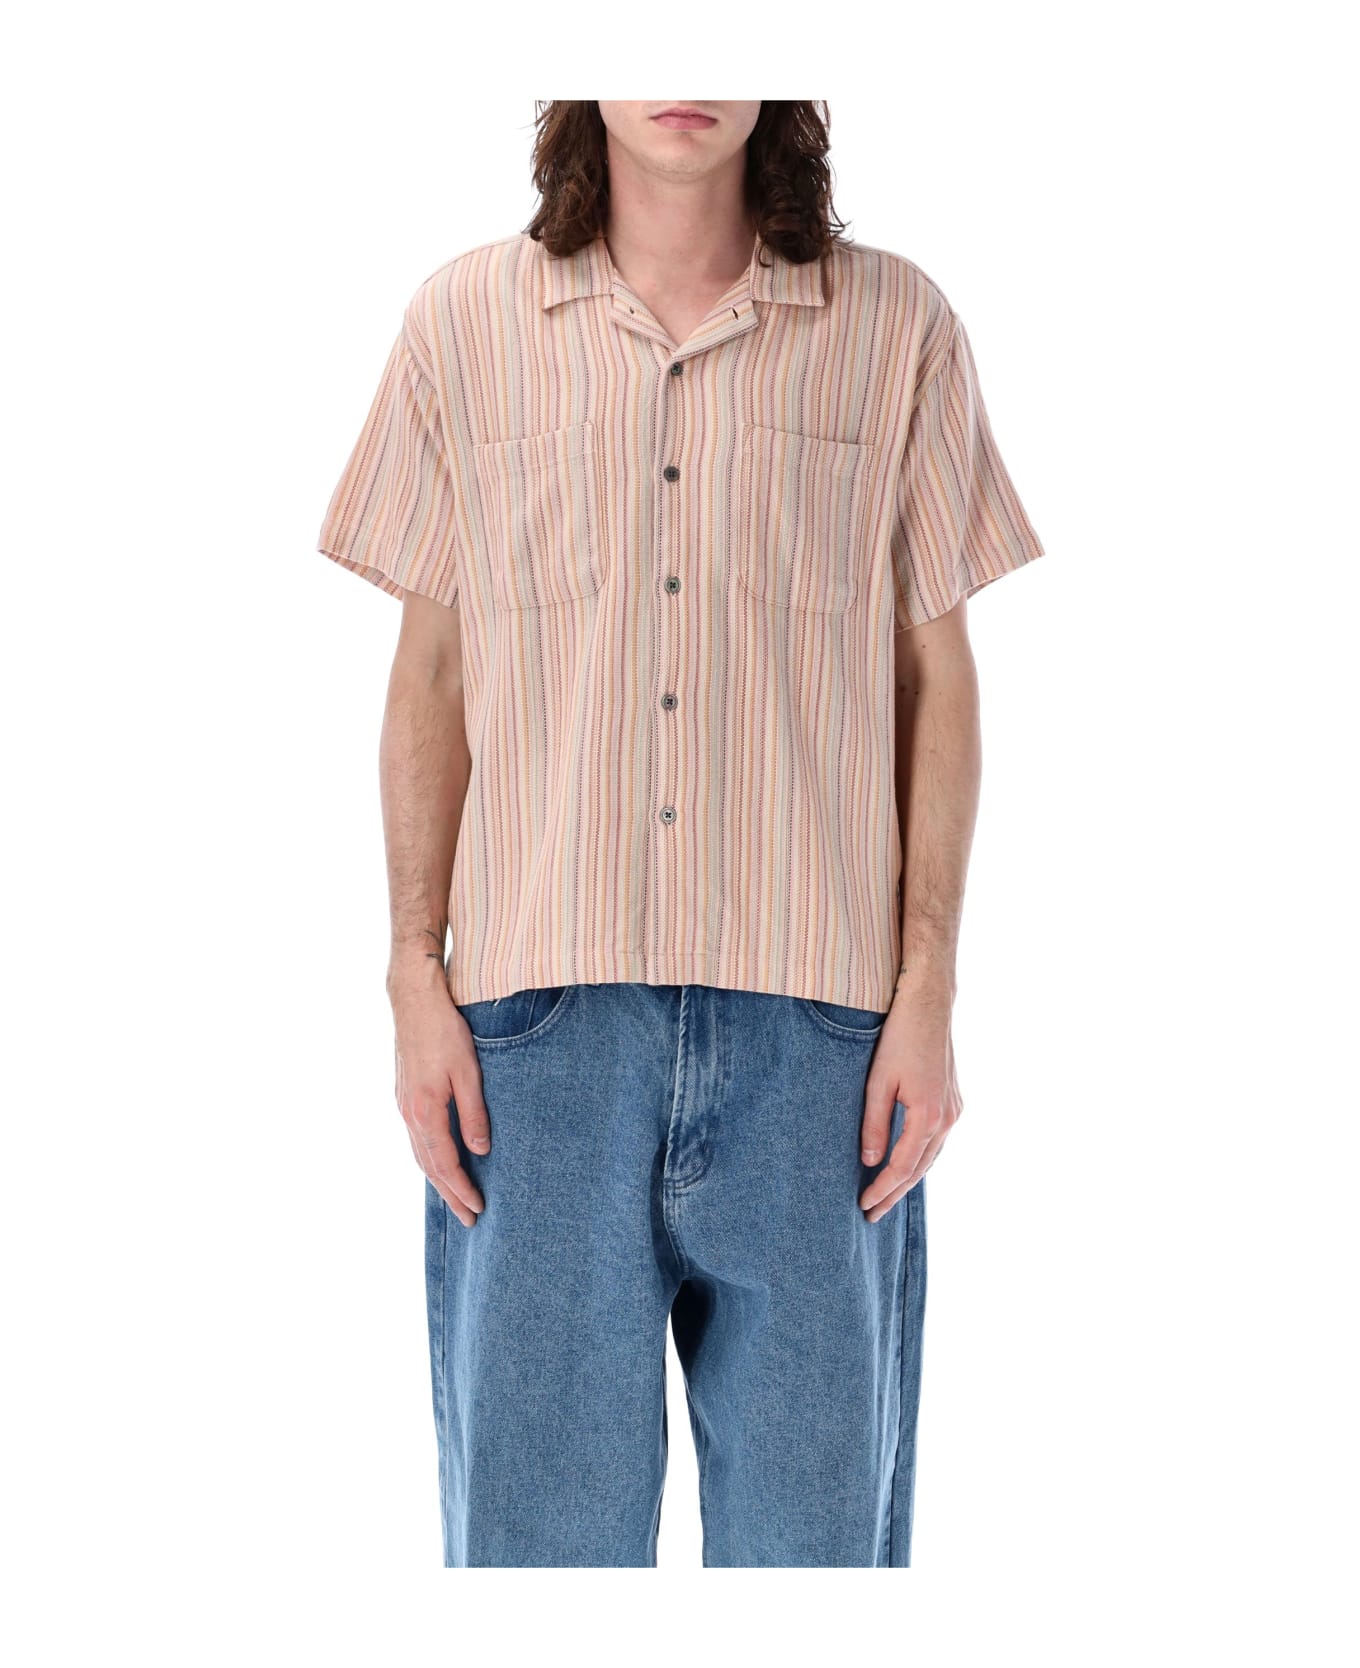 Obey Talby Shirt - UNBLEACHED